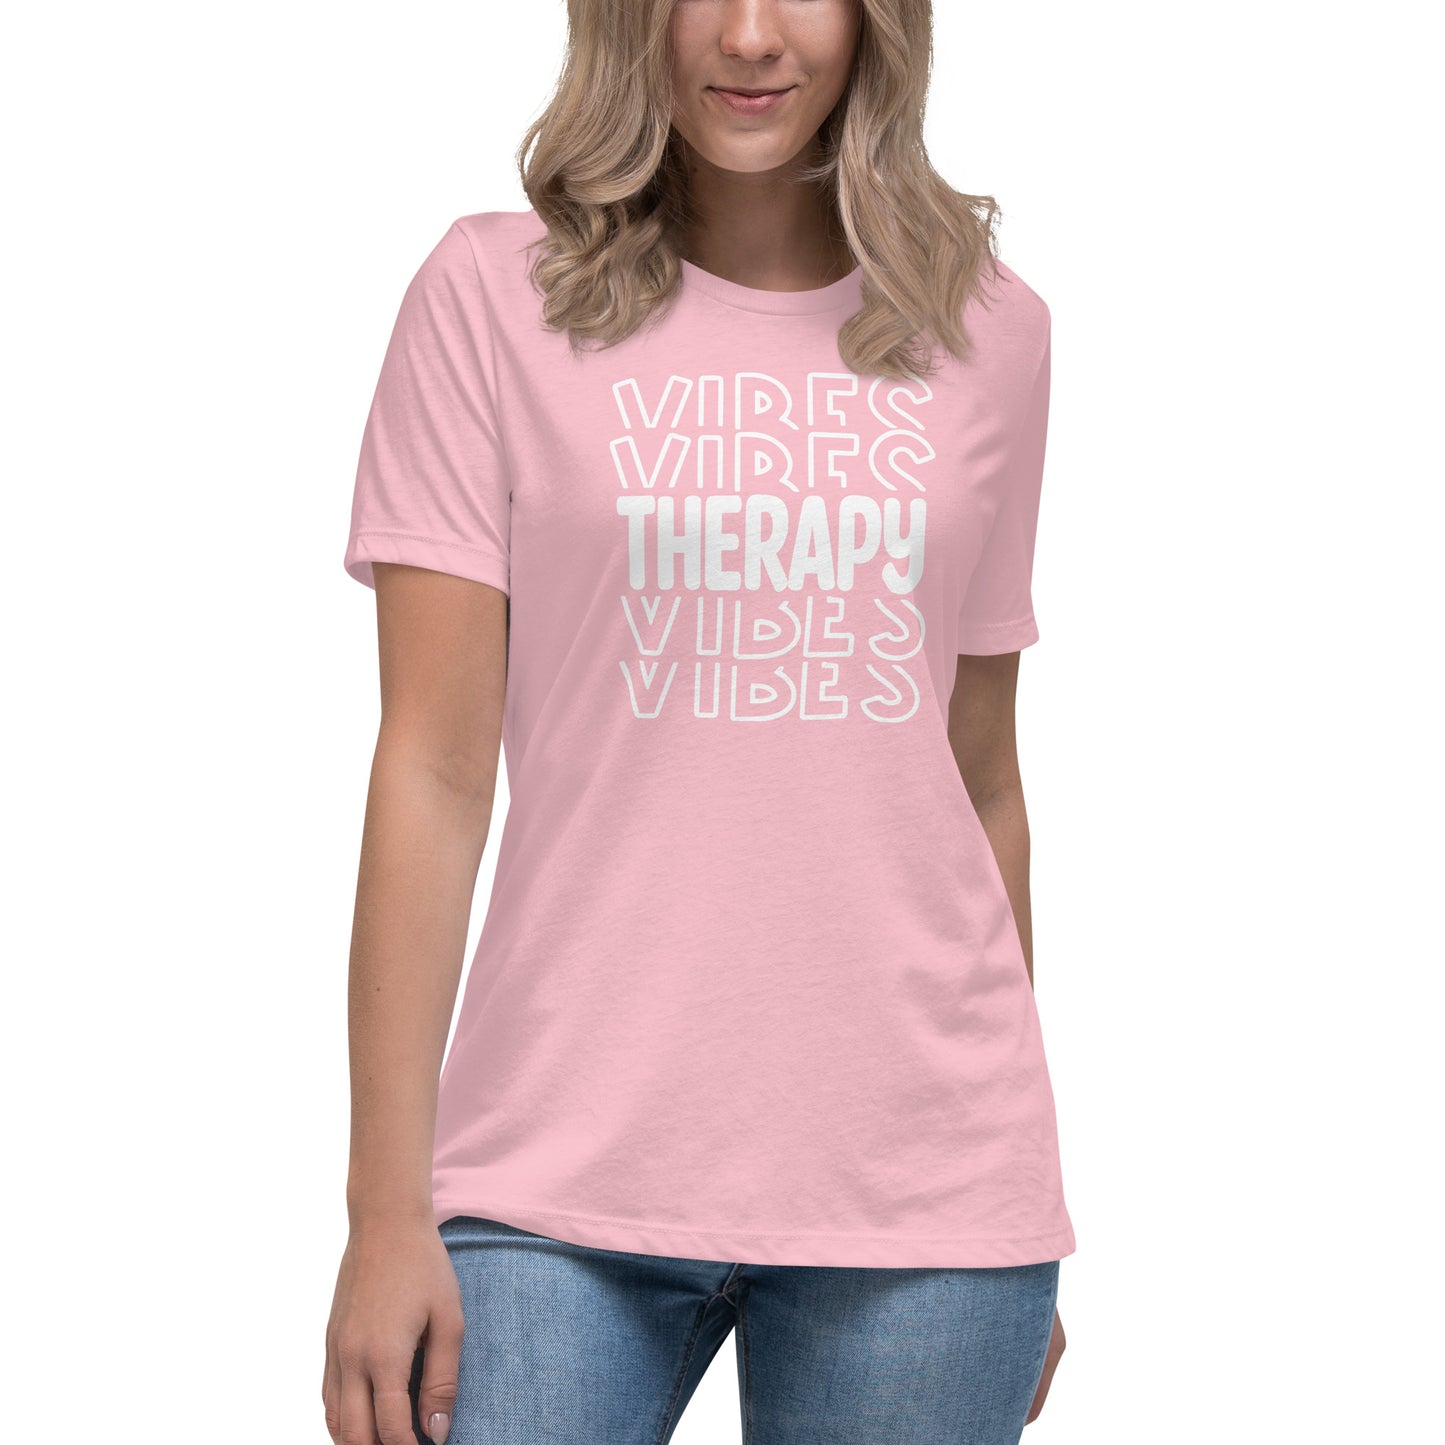 Therapy Vibes - Women’s T-shirt